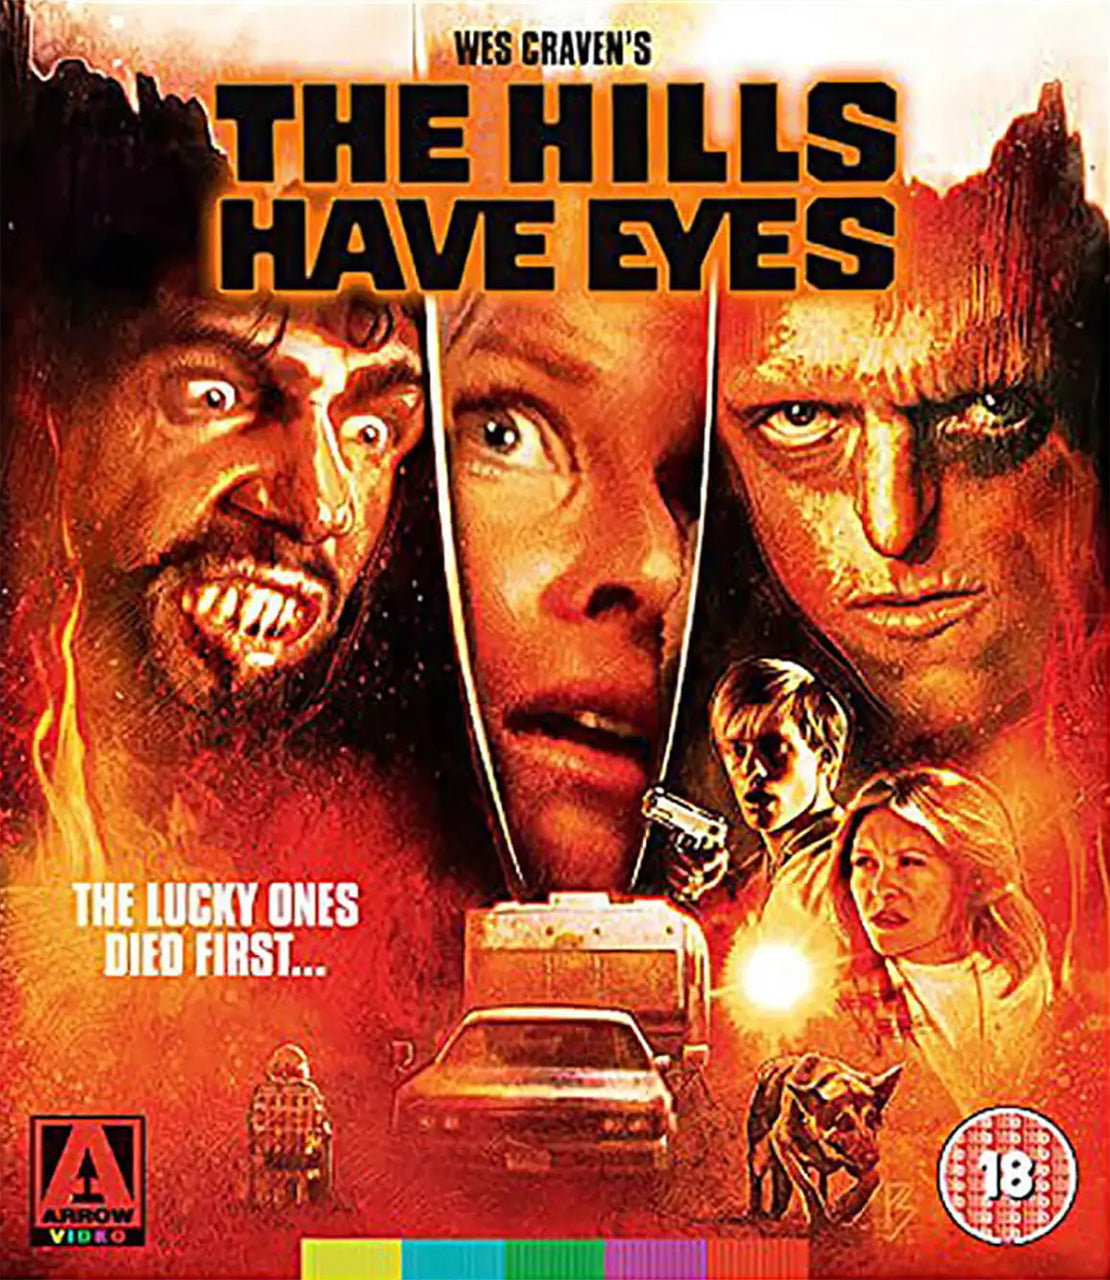 The Hills Have Eyes (1977) (Blu-ray)